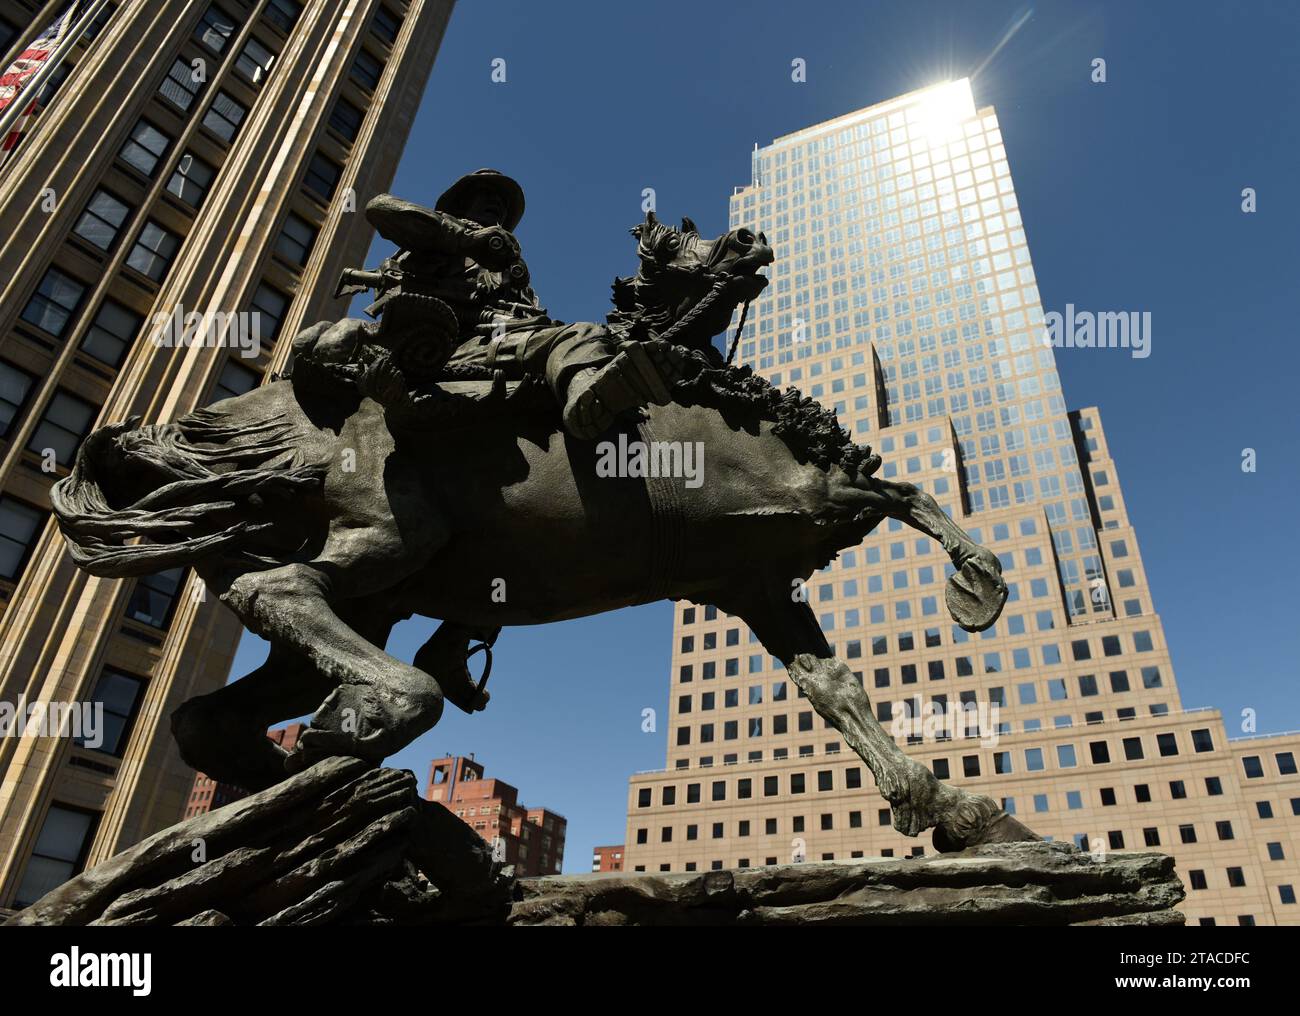 New York, USA - May 24, 2018: America's Response Monument in Liberty Park near NYC 9/11 Memorial in New York. Stock Photo